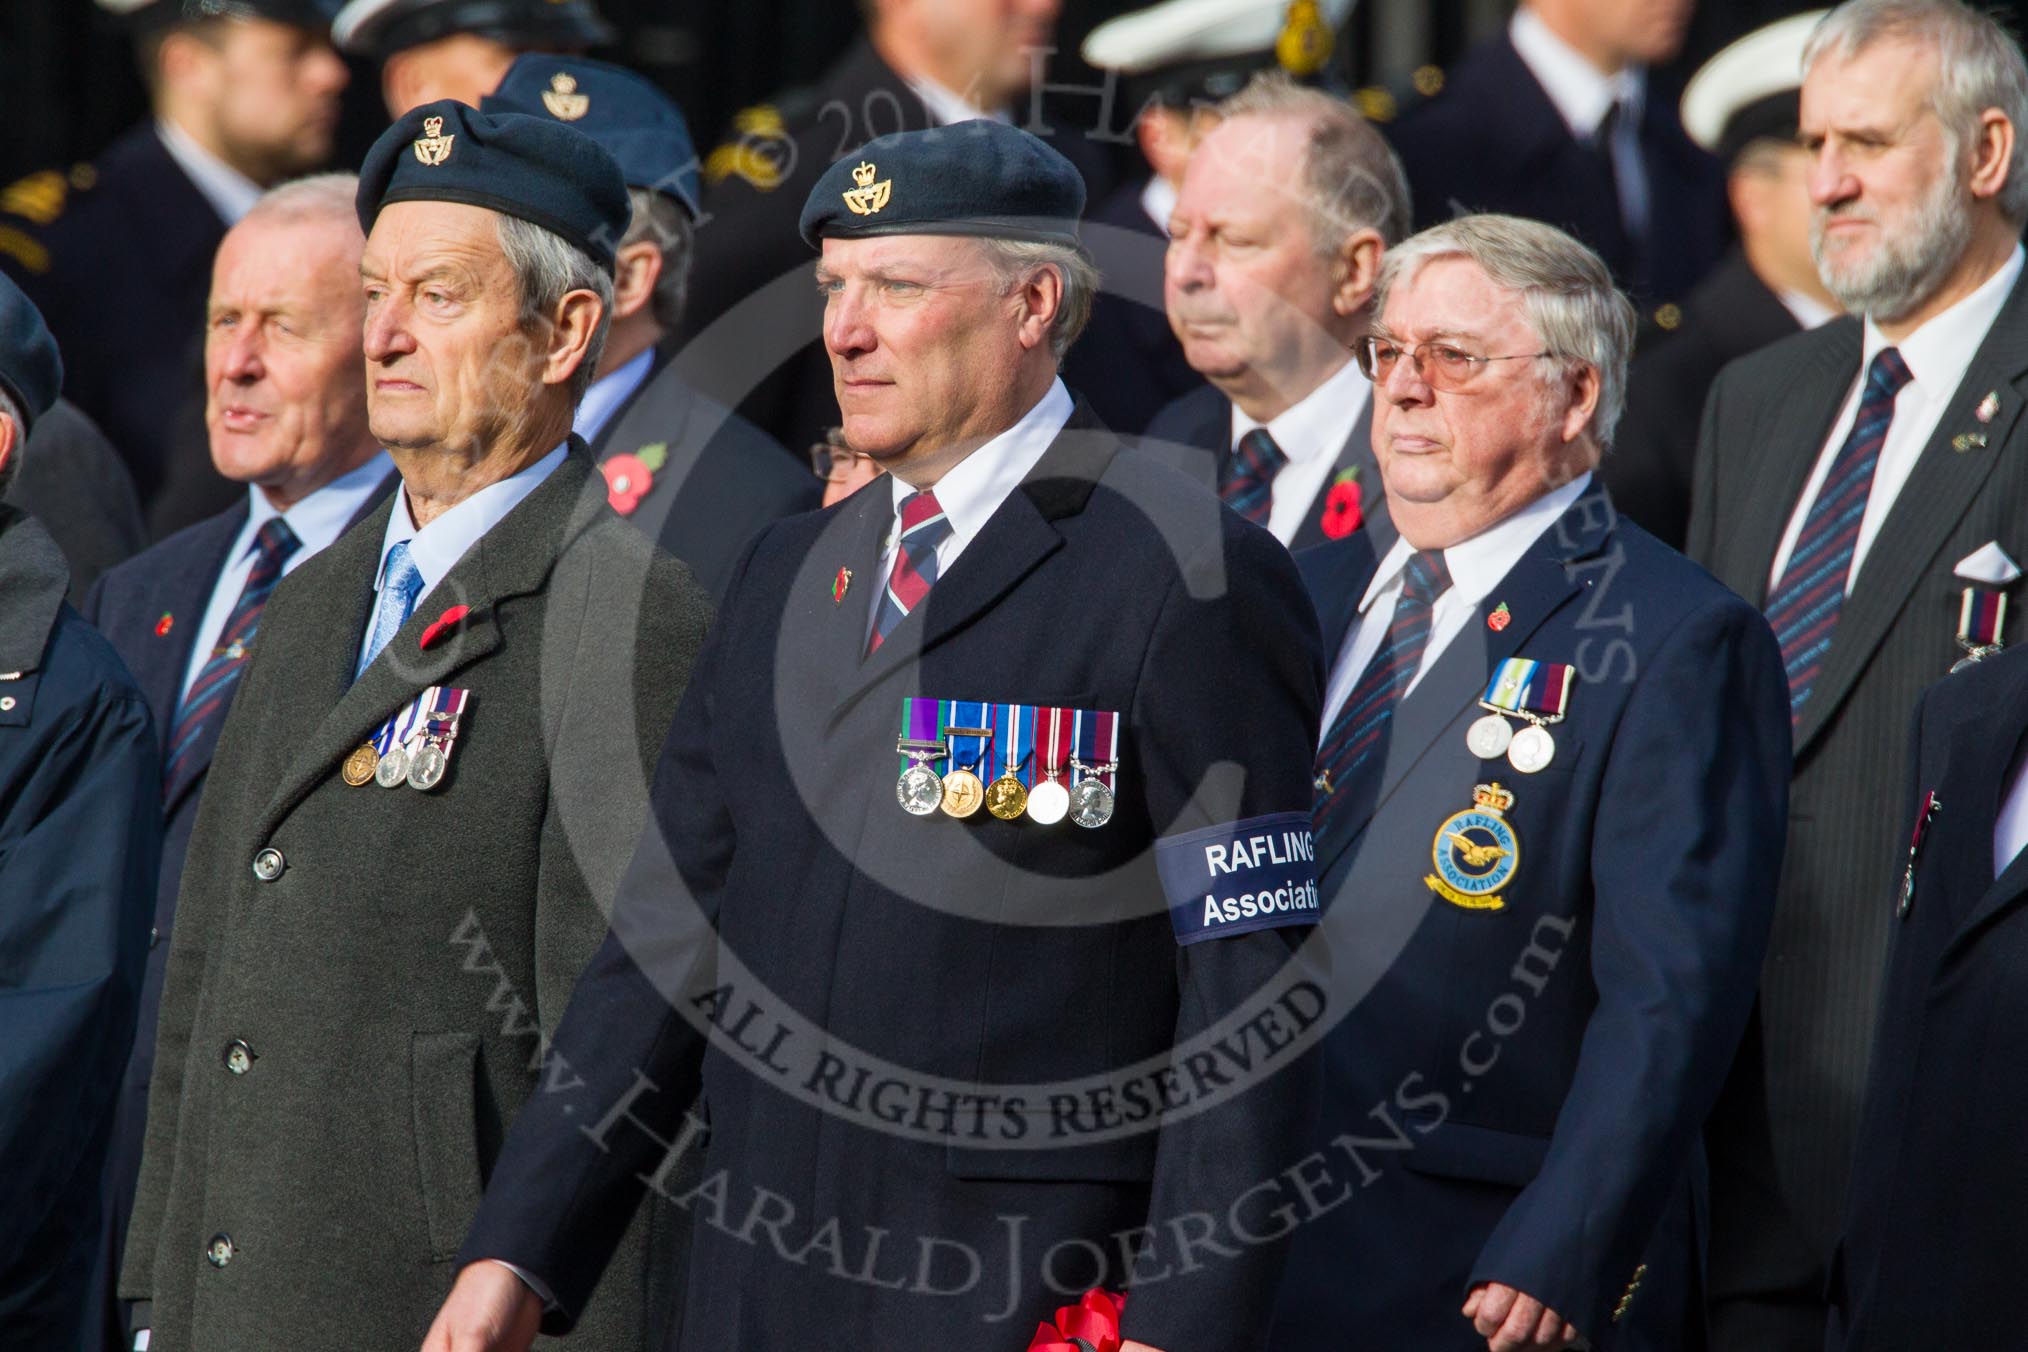 Remembrance Sunday at the Cenotaph in London 2014: Group C6 - RAFLING Association.
Press stand opposite the Foreign Office building, Whitehall, London SW1,
London,
Greater London,
United Kingdom,
on 09 November 2014 at 11:39, image #111